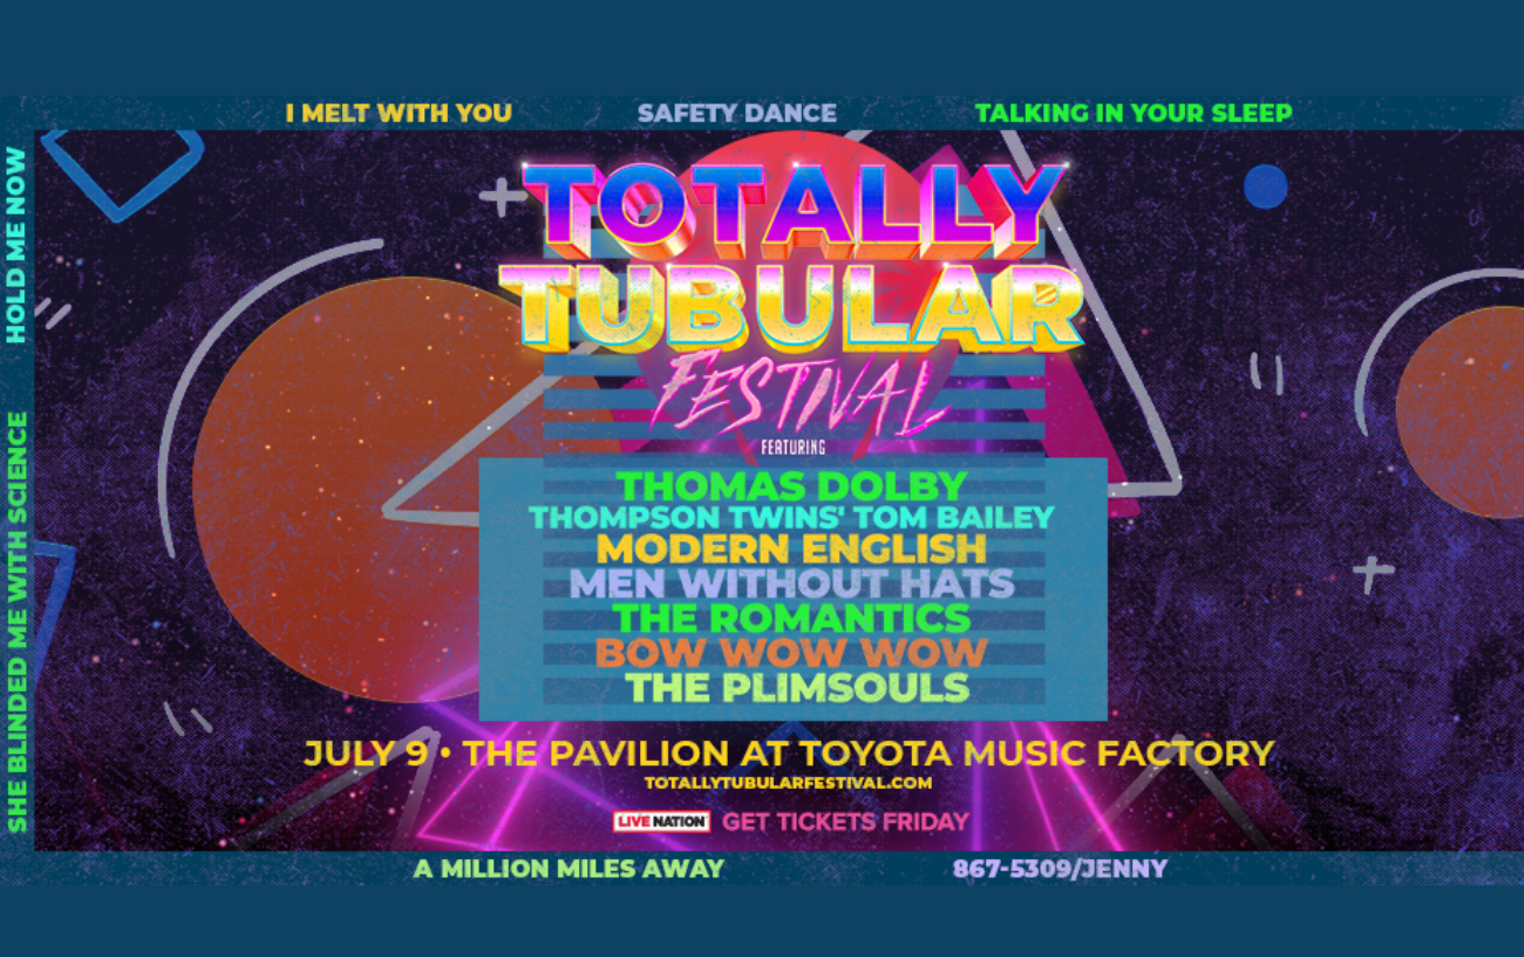 Win 2 tickets to Totally Tubular Festival!